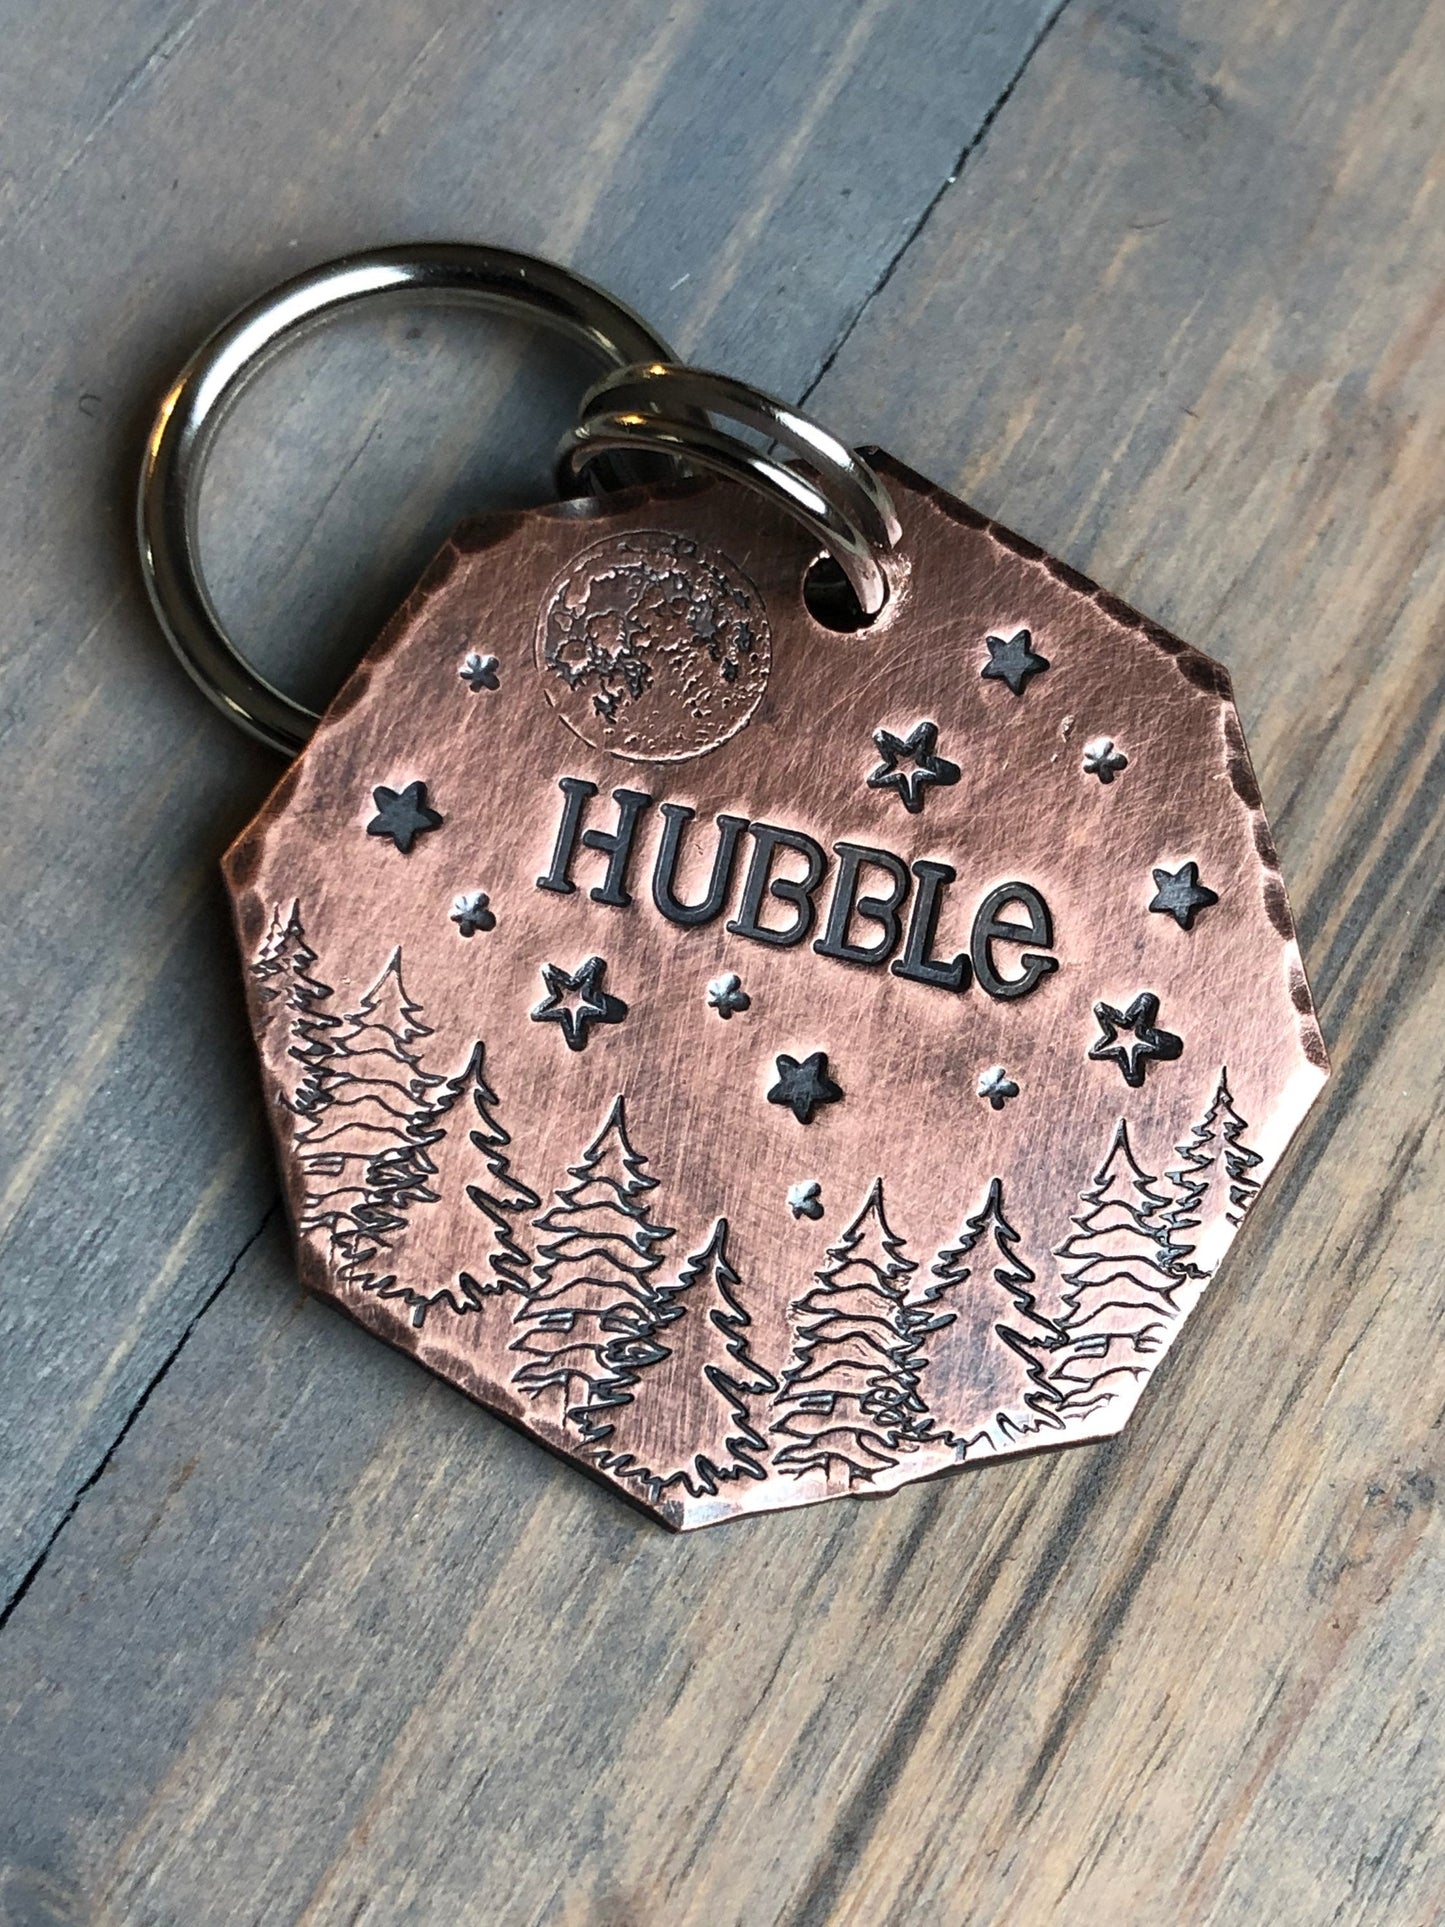 Name Tag for Dog, Hand Stamped Pet ID Tag, Dog ID Tag with Full Moon and Trees, Personalized Dog Tag for Dog, Hubble, Celestial Pet Tag Star